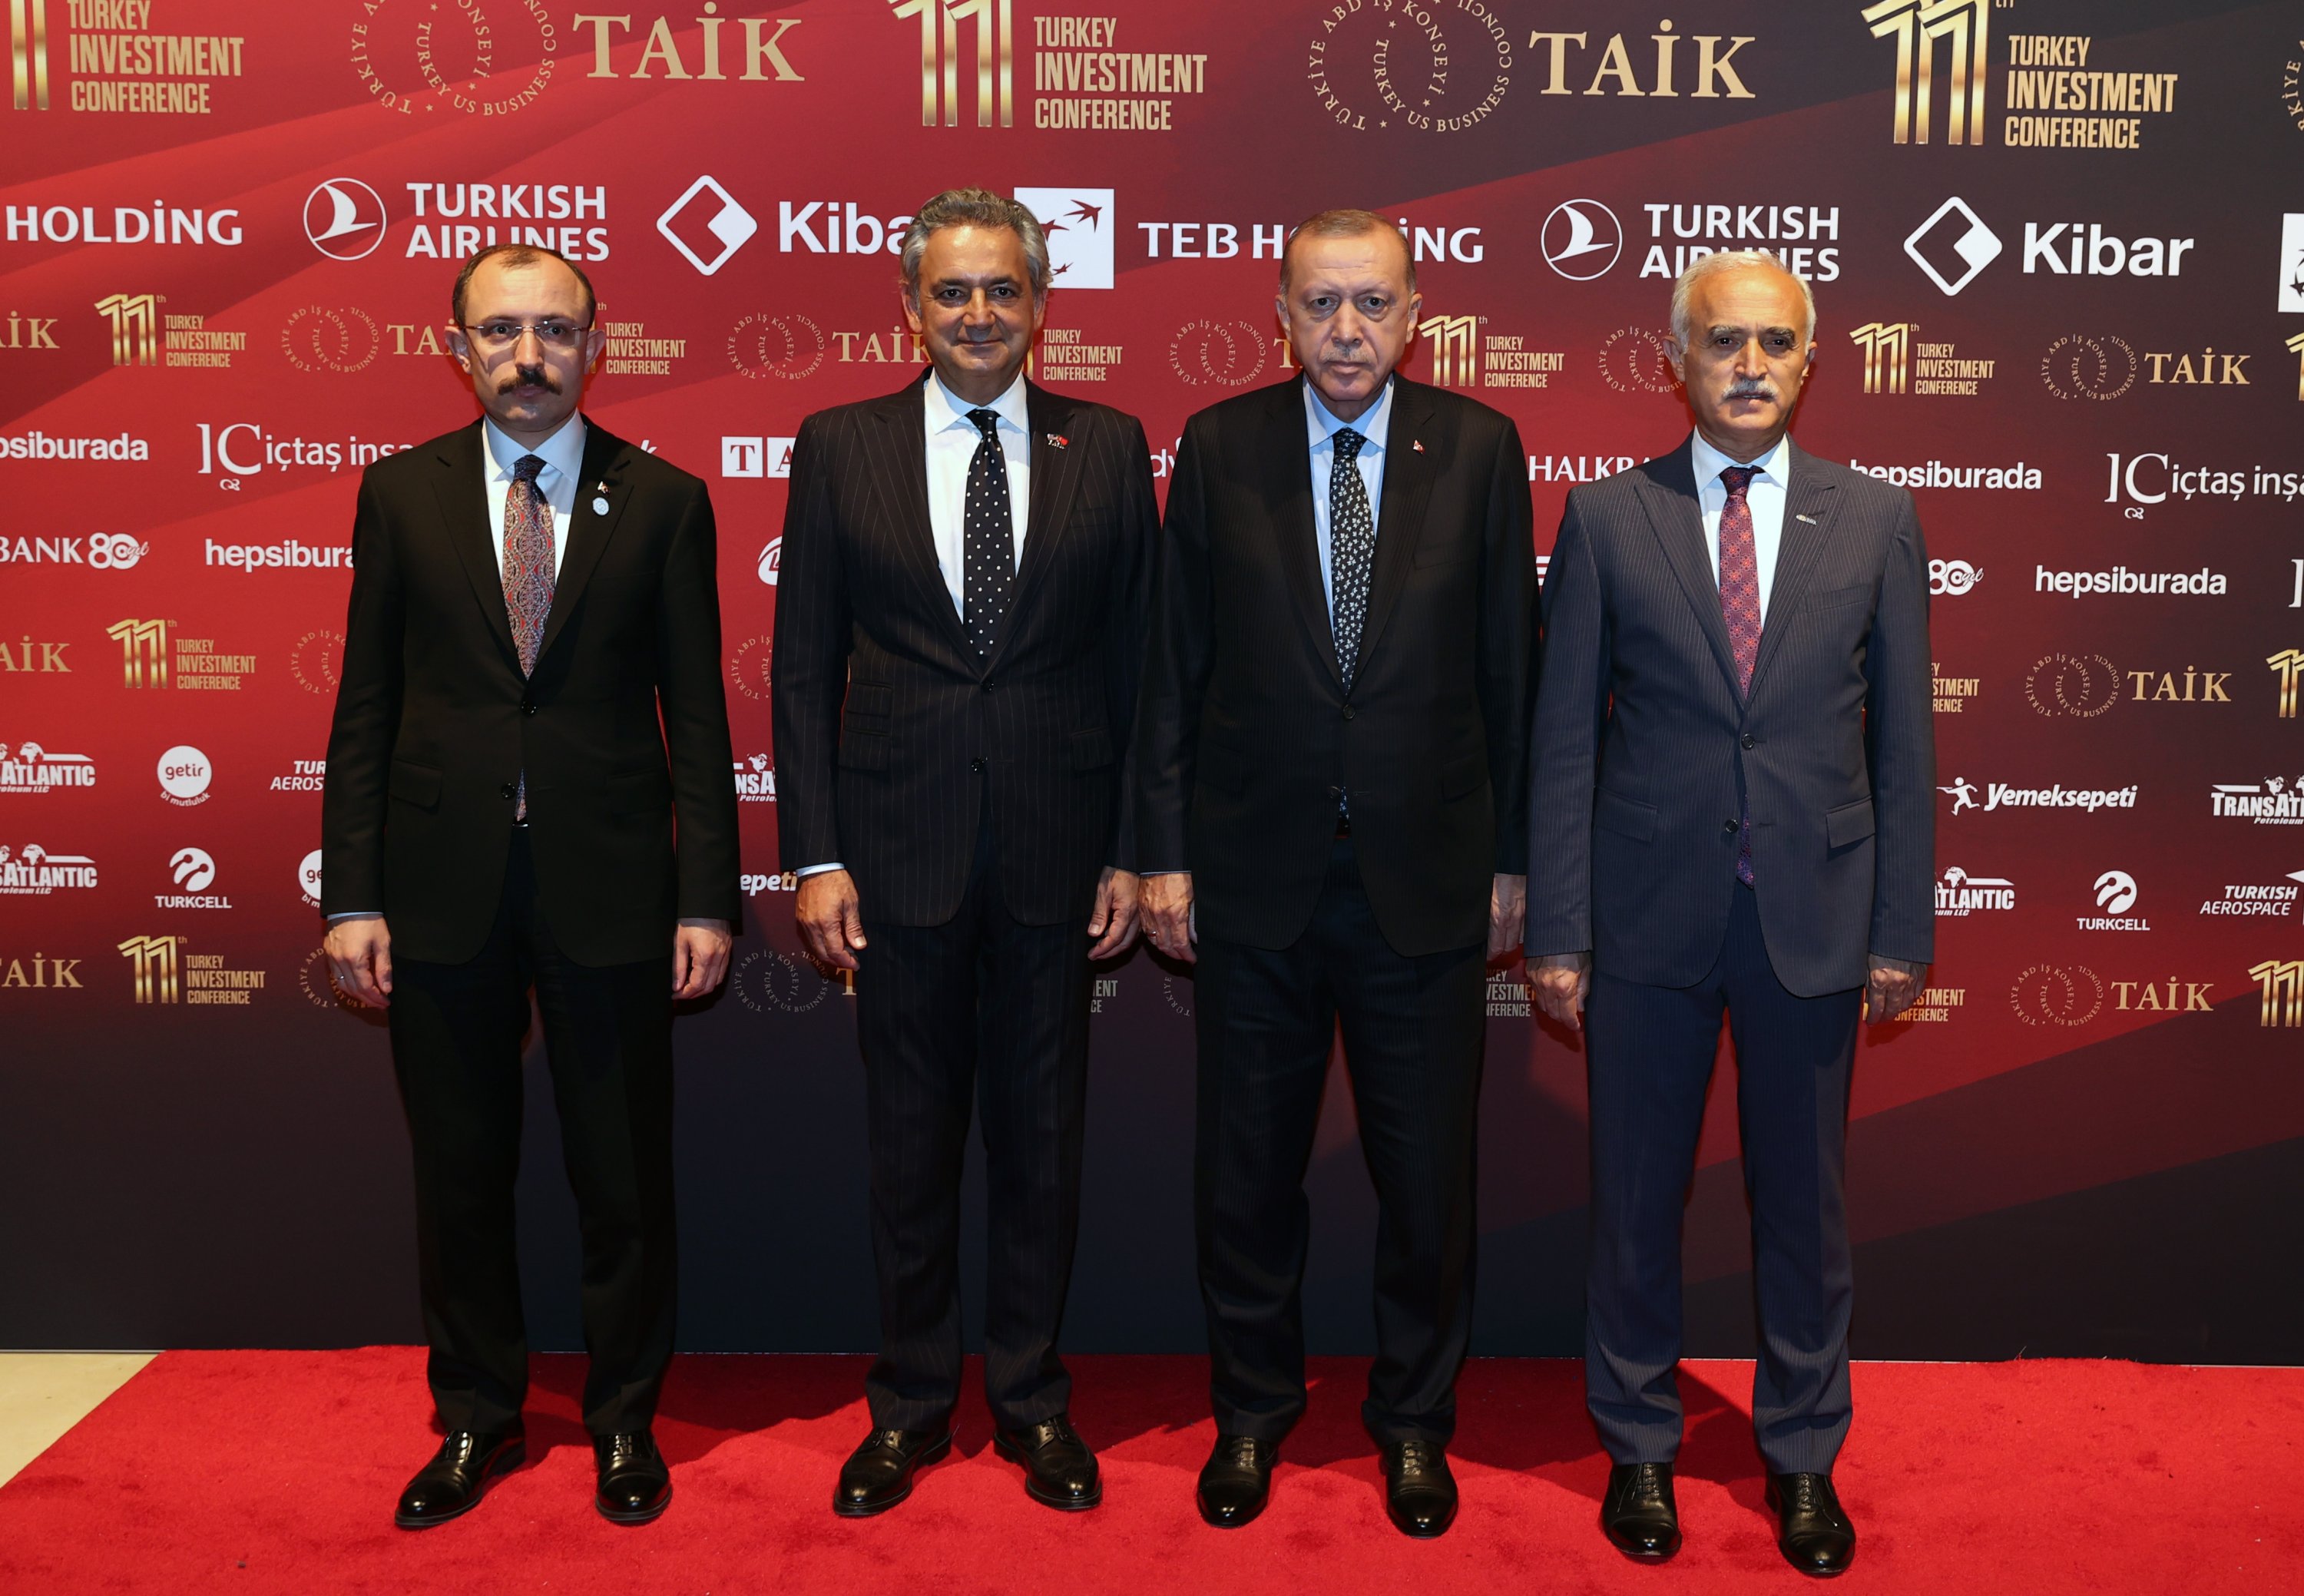 President Recep Tayyip Erdoğan (2nd R), Trade Minister Mehmet Muş (L), Turkey-U.S. Business Council (TAIK) Chairperson Mehmet Ali Yalçındağ (2nd L) and Foreign Economic Relations Board (DEIK) Head Nail Olpak during the 11th Turkey Investment Conference, in New York, U.S., Sept. 21, 2021. (AA Photo)